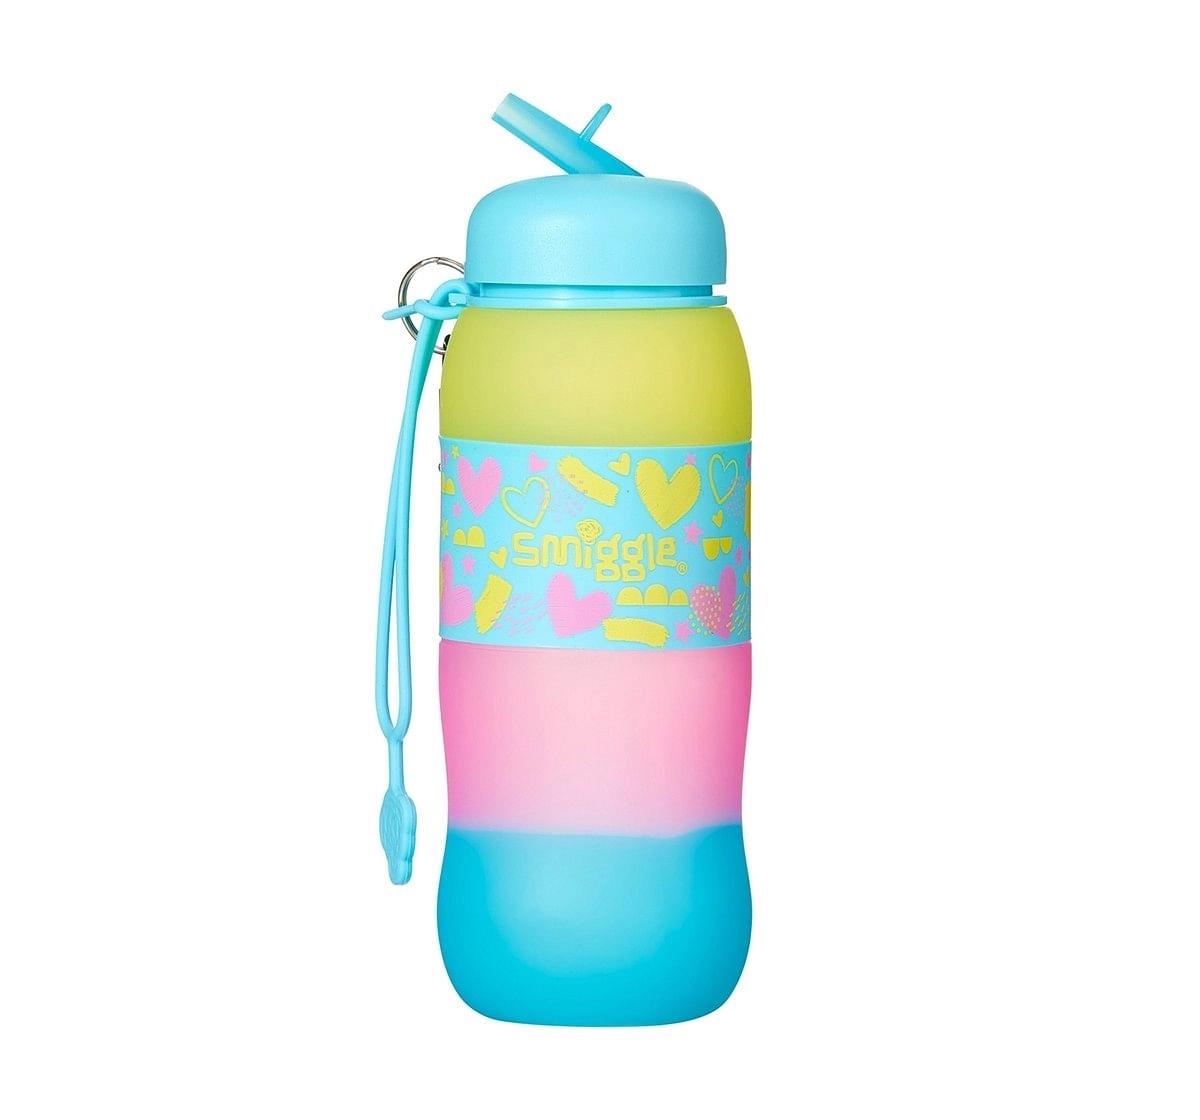 Smiggle Golly Silicone Roll Drink Bottle - Heart Print Bags for Kids age 3Y+ (Blue)